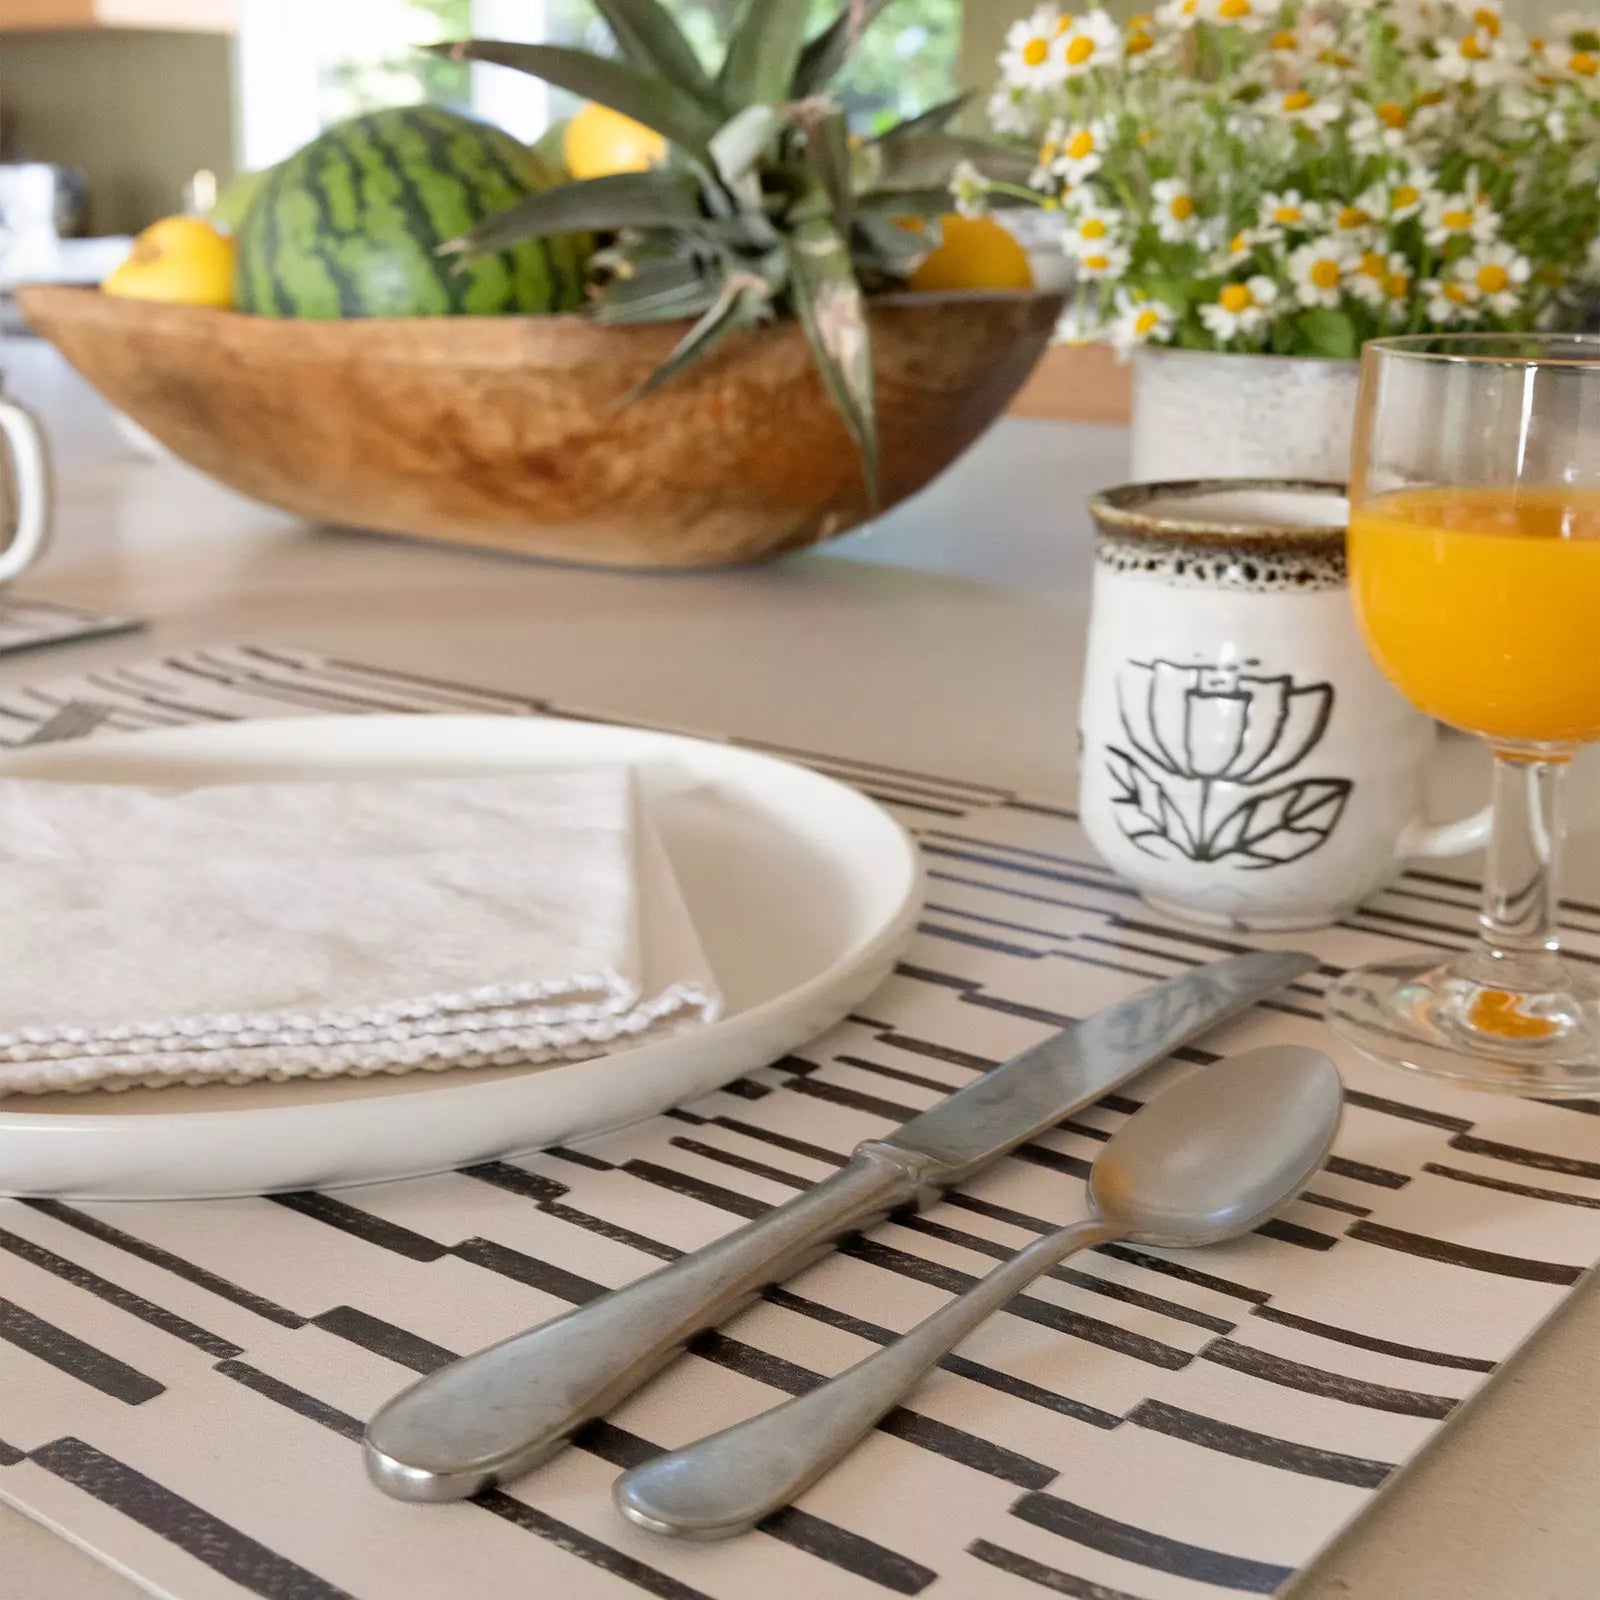 Nara Black and White Striped place mat at table setting with plate, napkin and orange juice